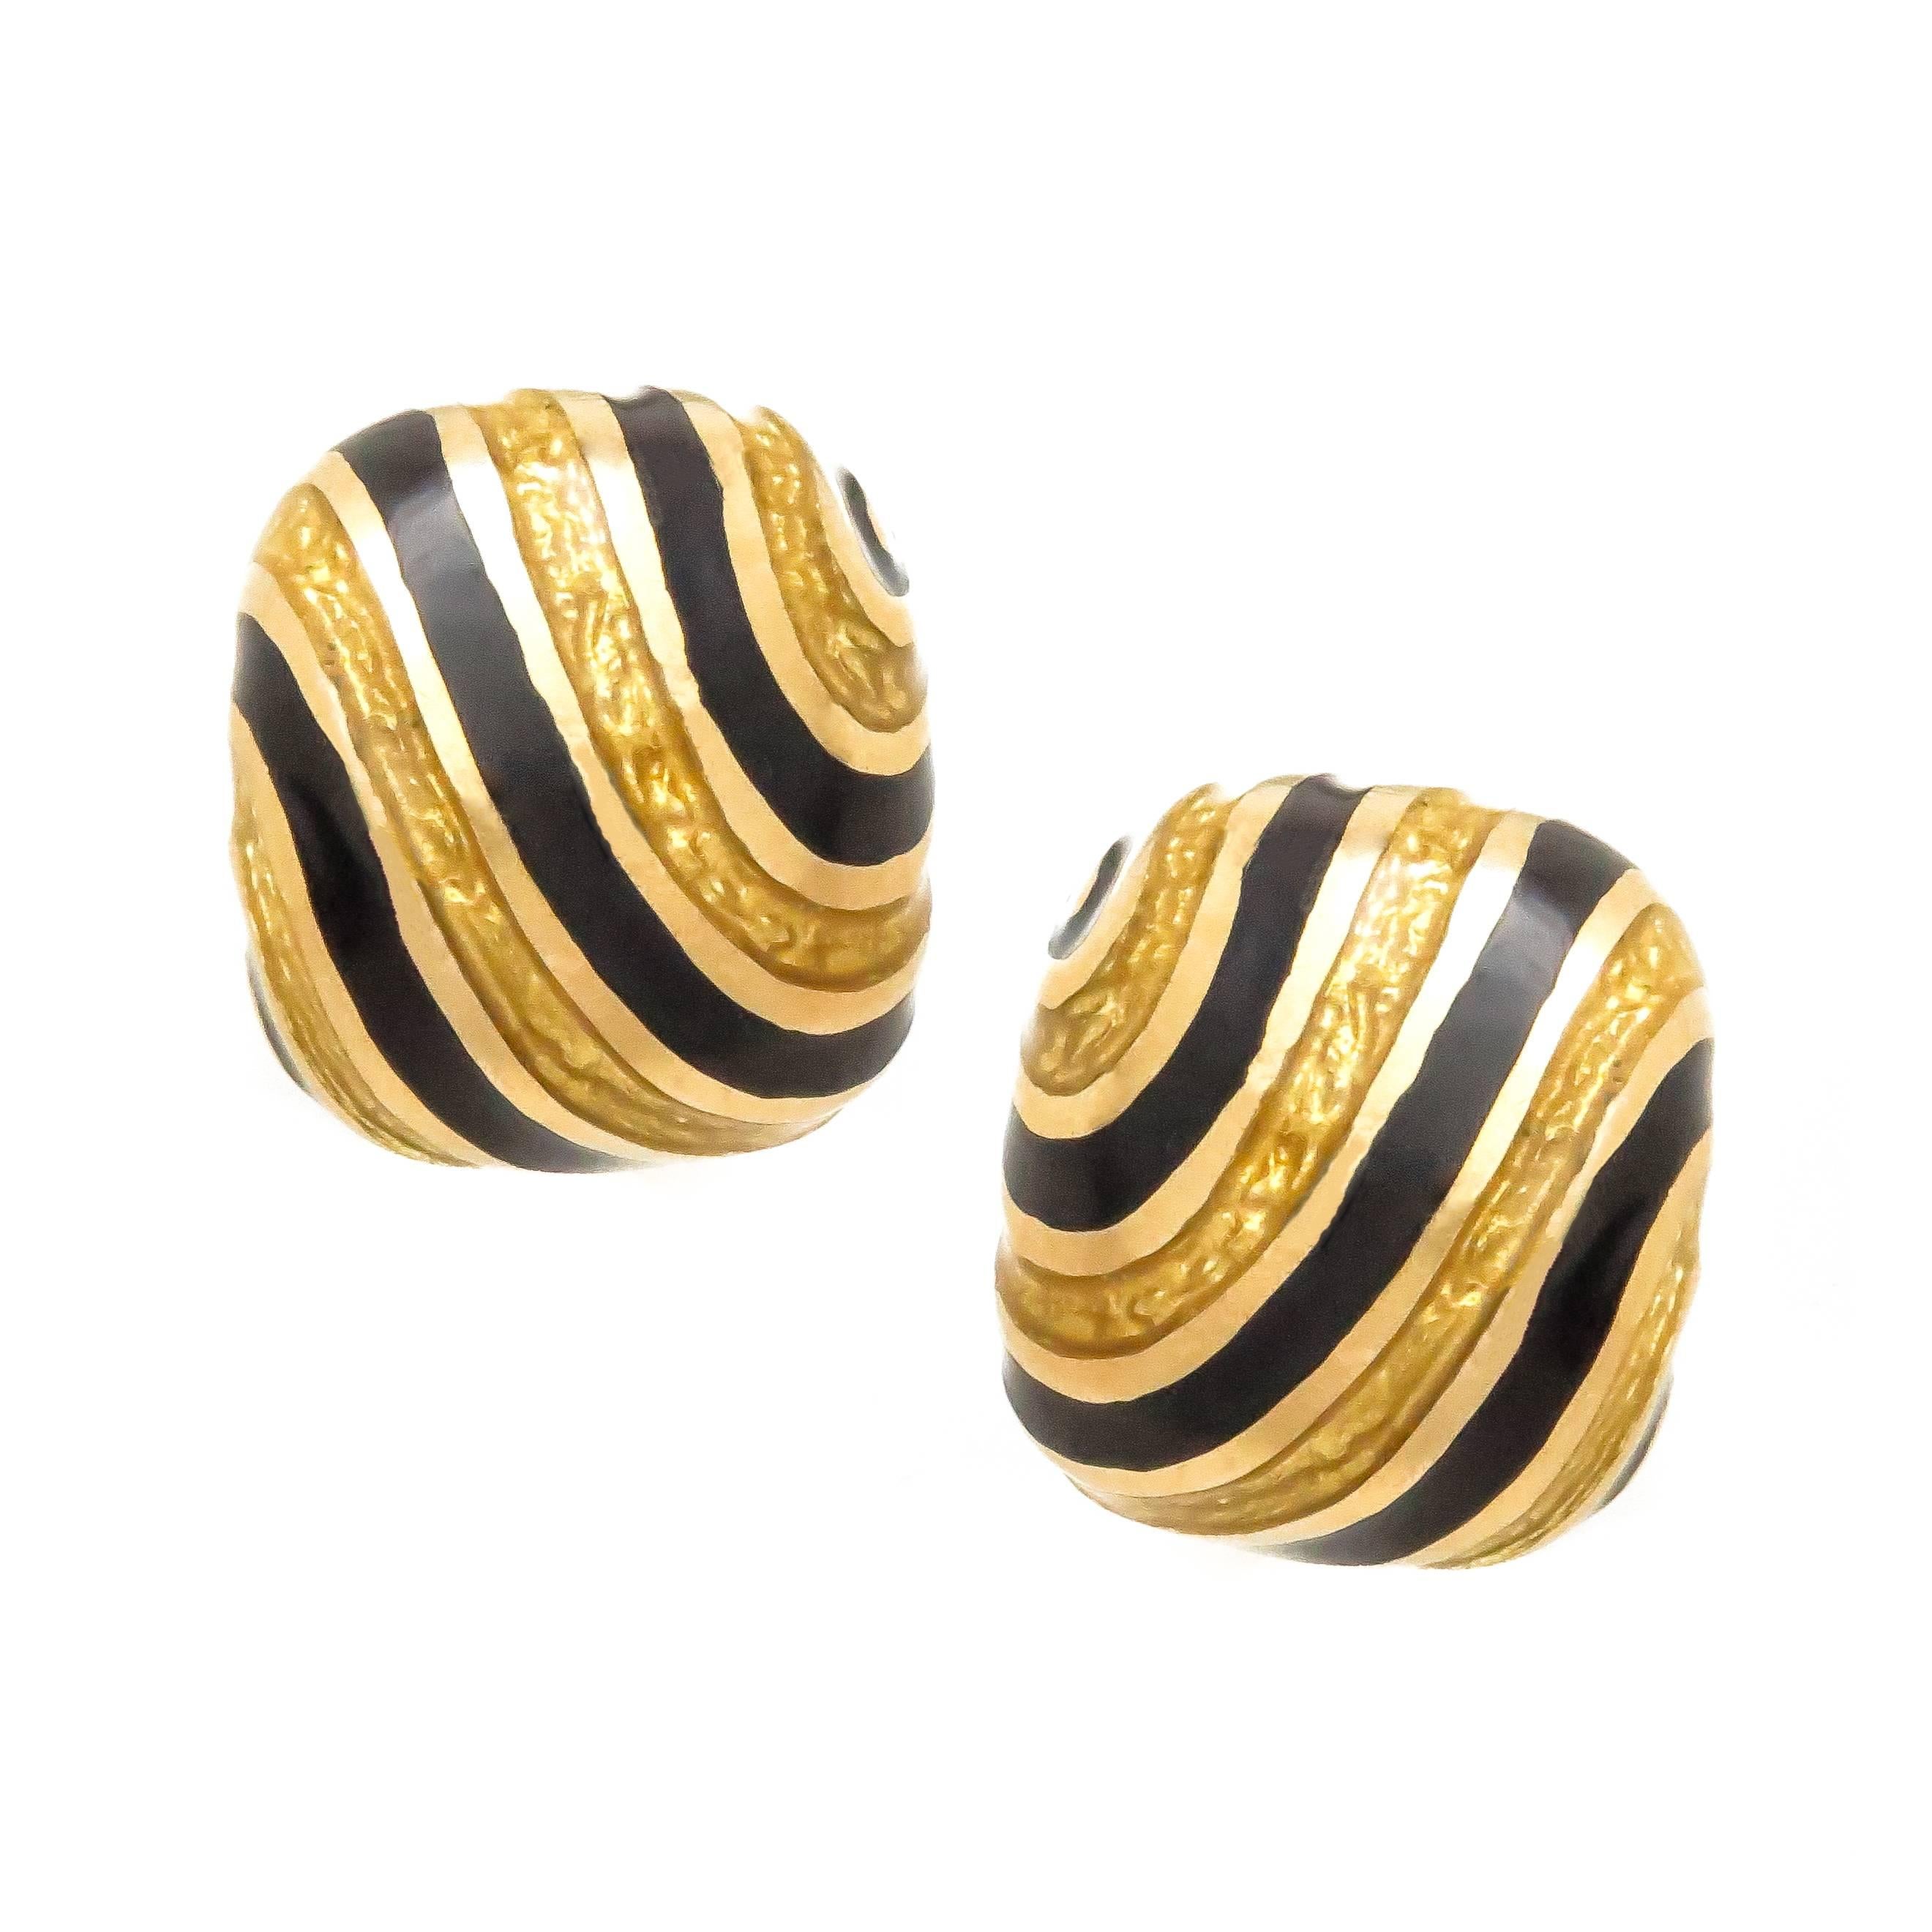 Circa 1970s David Webb 18K Yellow Gold Cufflinks. The cushion shape tops measure 5/8 X 5/8 inch. Finished in Black and Yellow Enamel and having Toggle backs for easy on and off. 